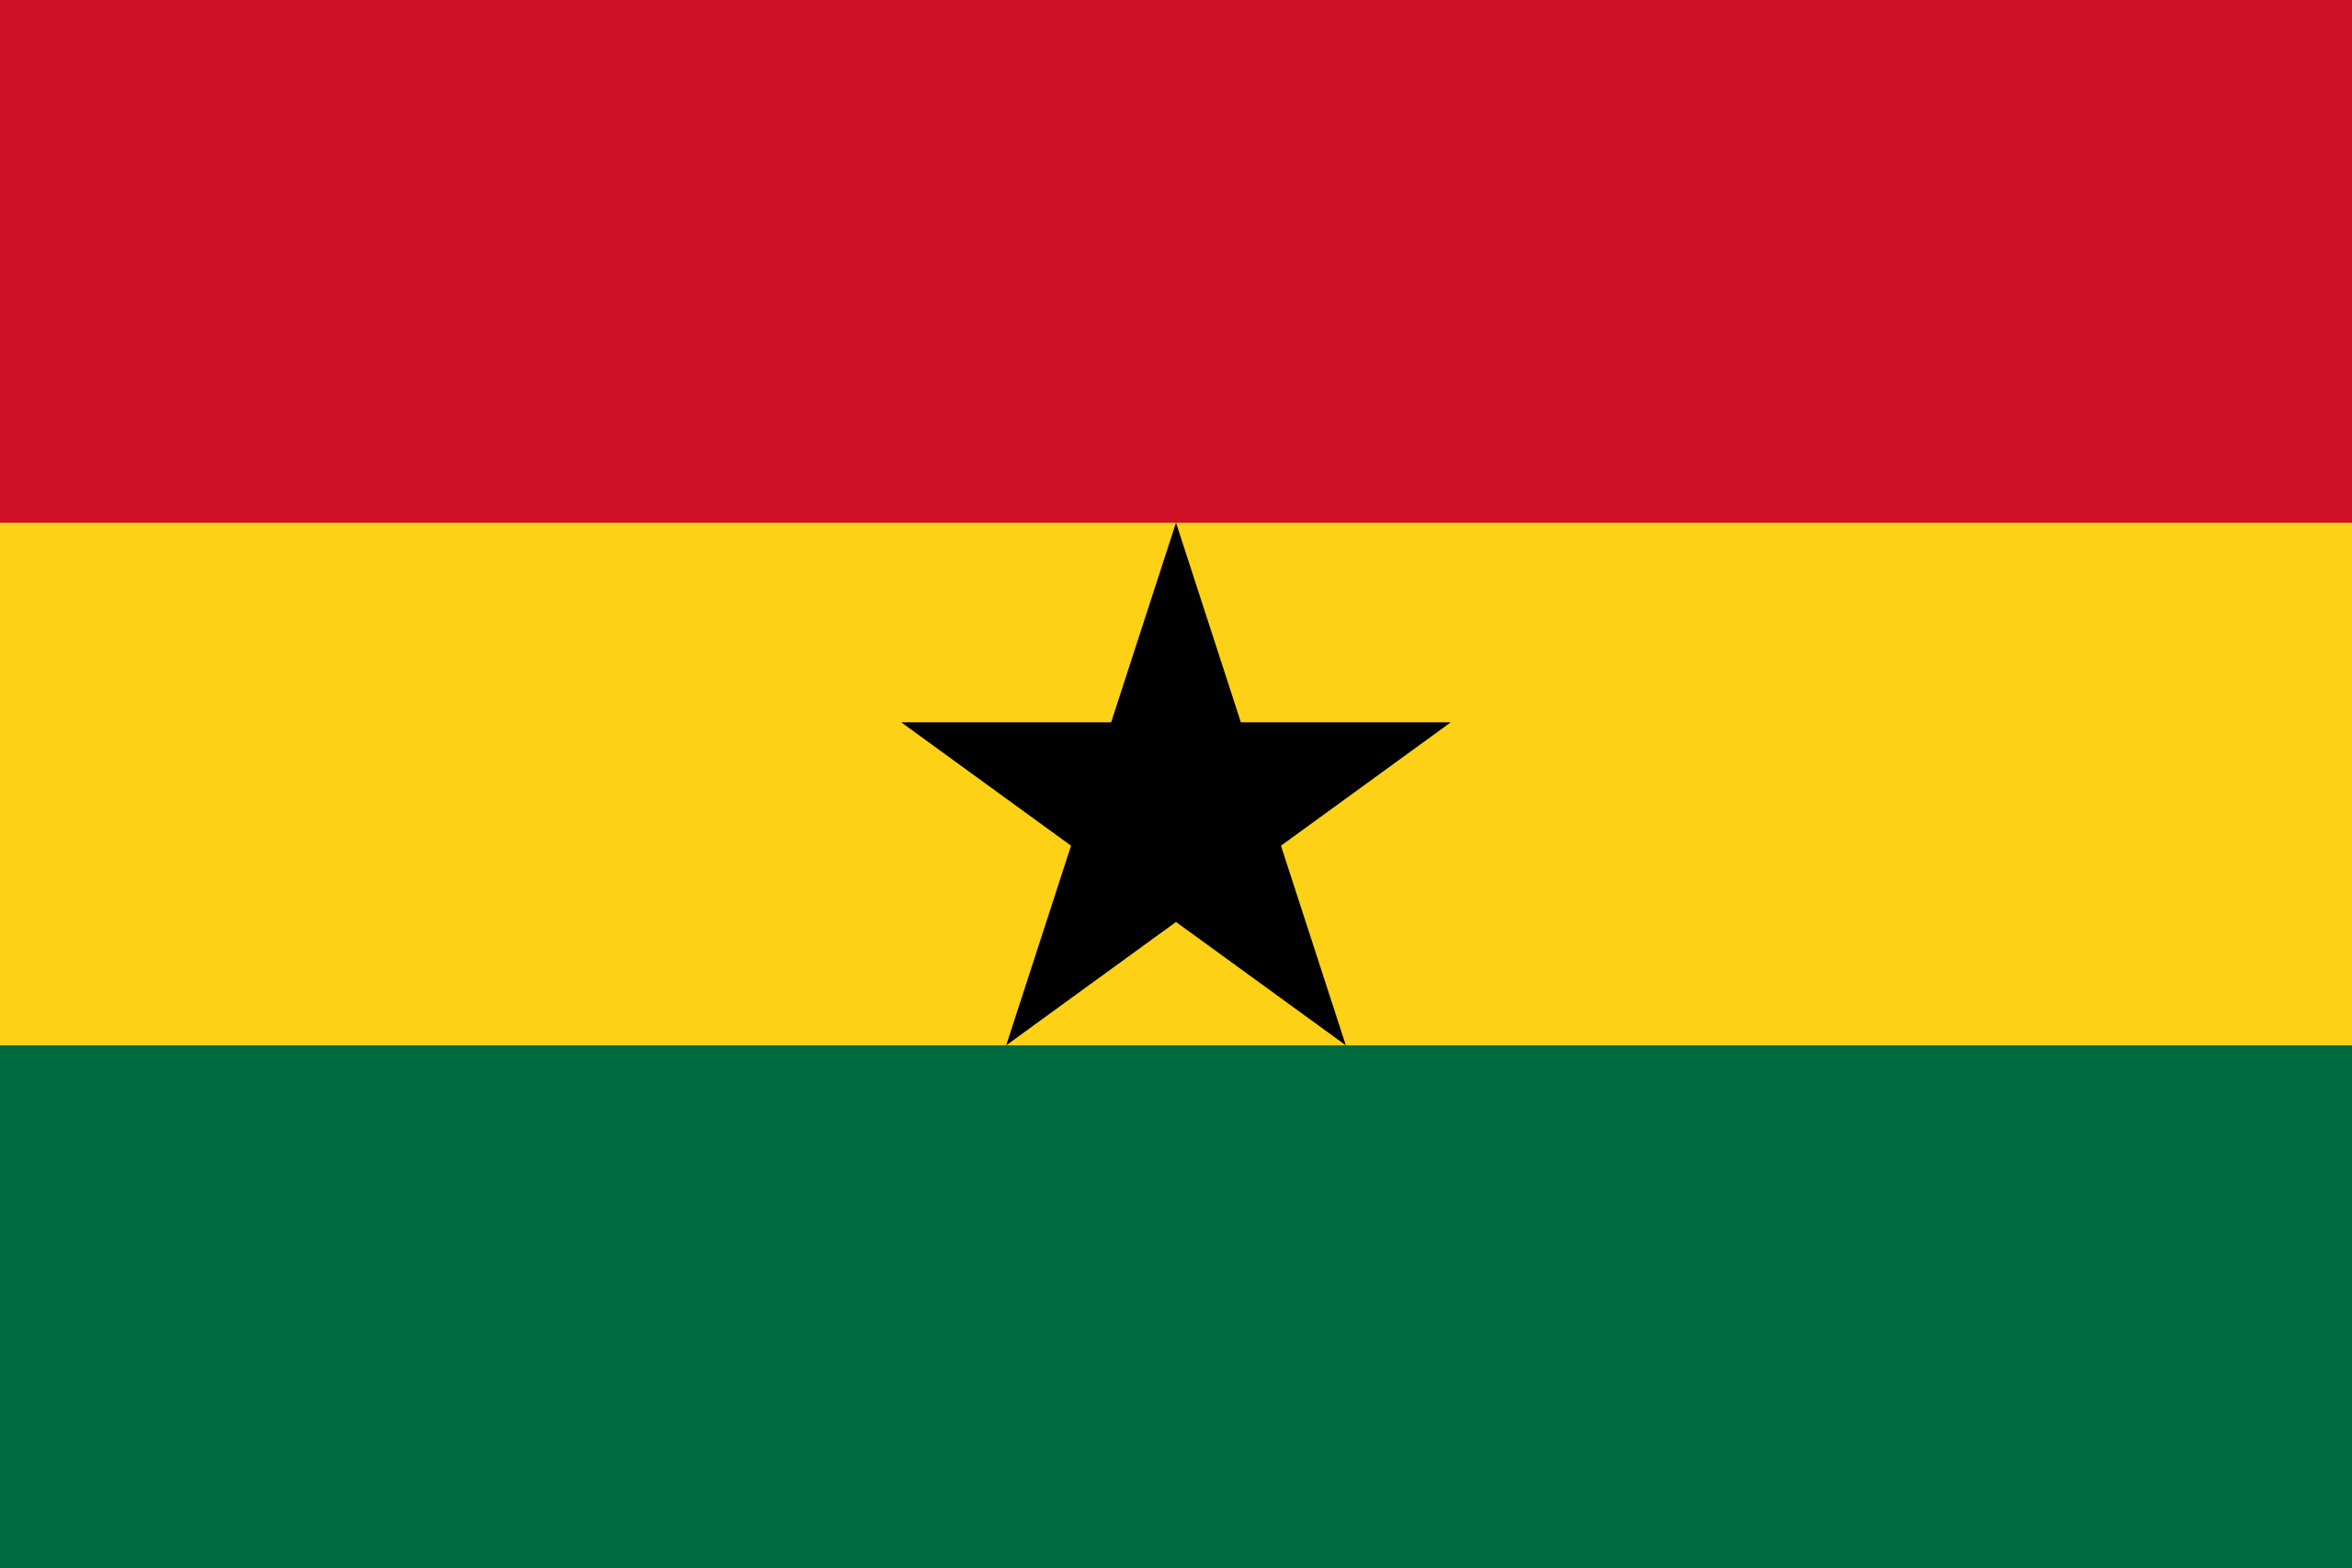 What’s up Ghana!